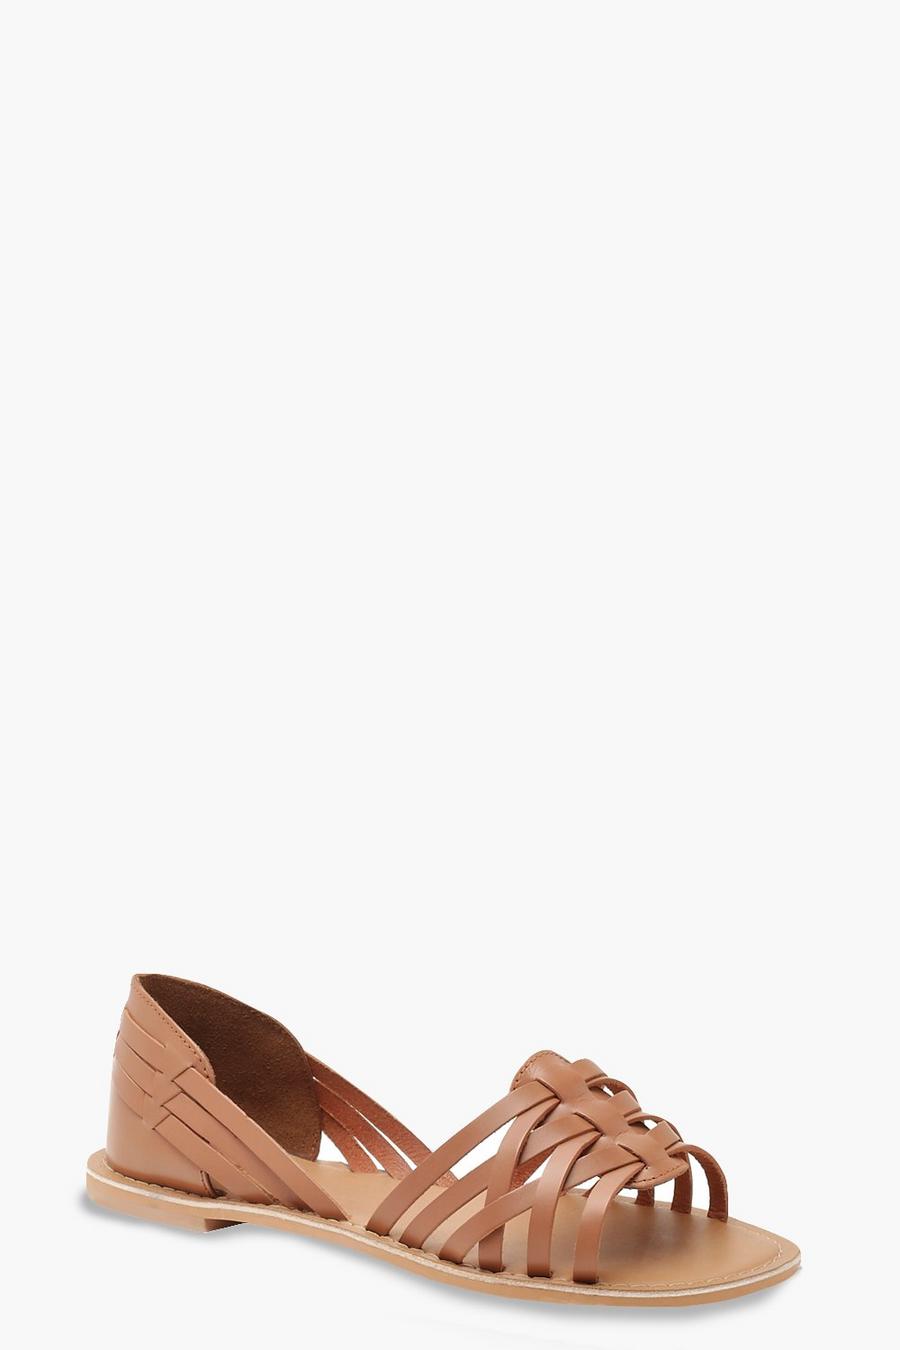 Tan brun Wide Fit Woven Leather Ballet Flats